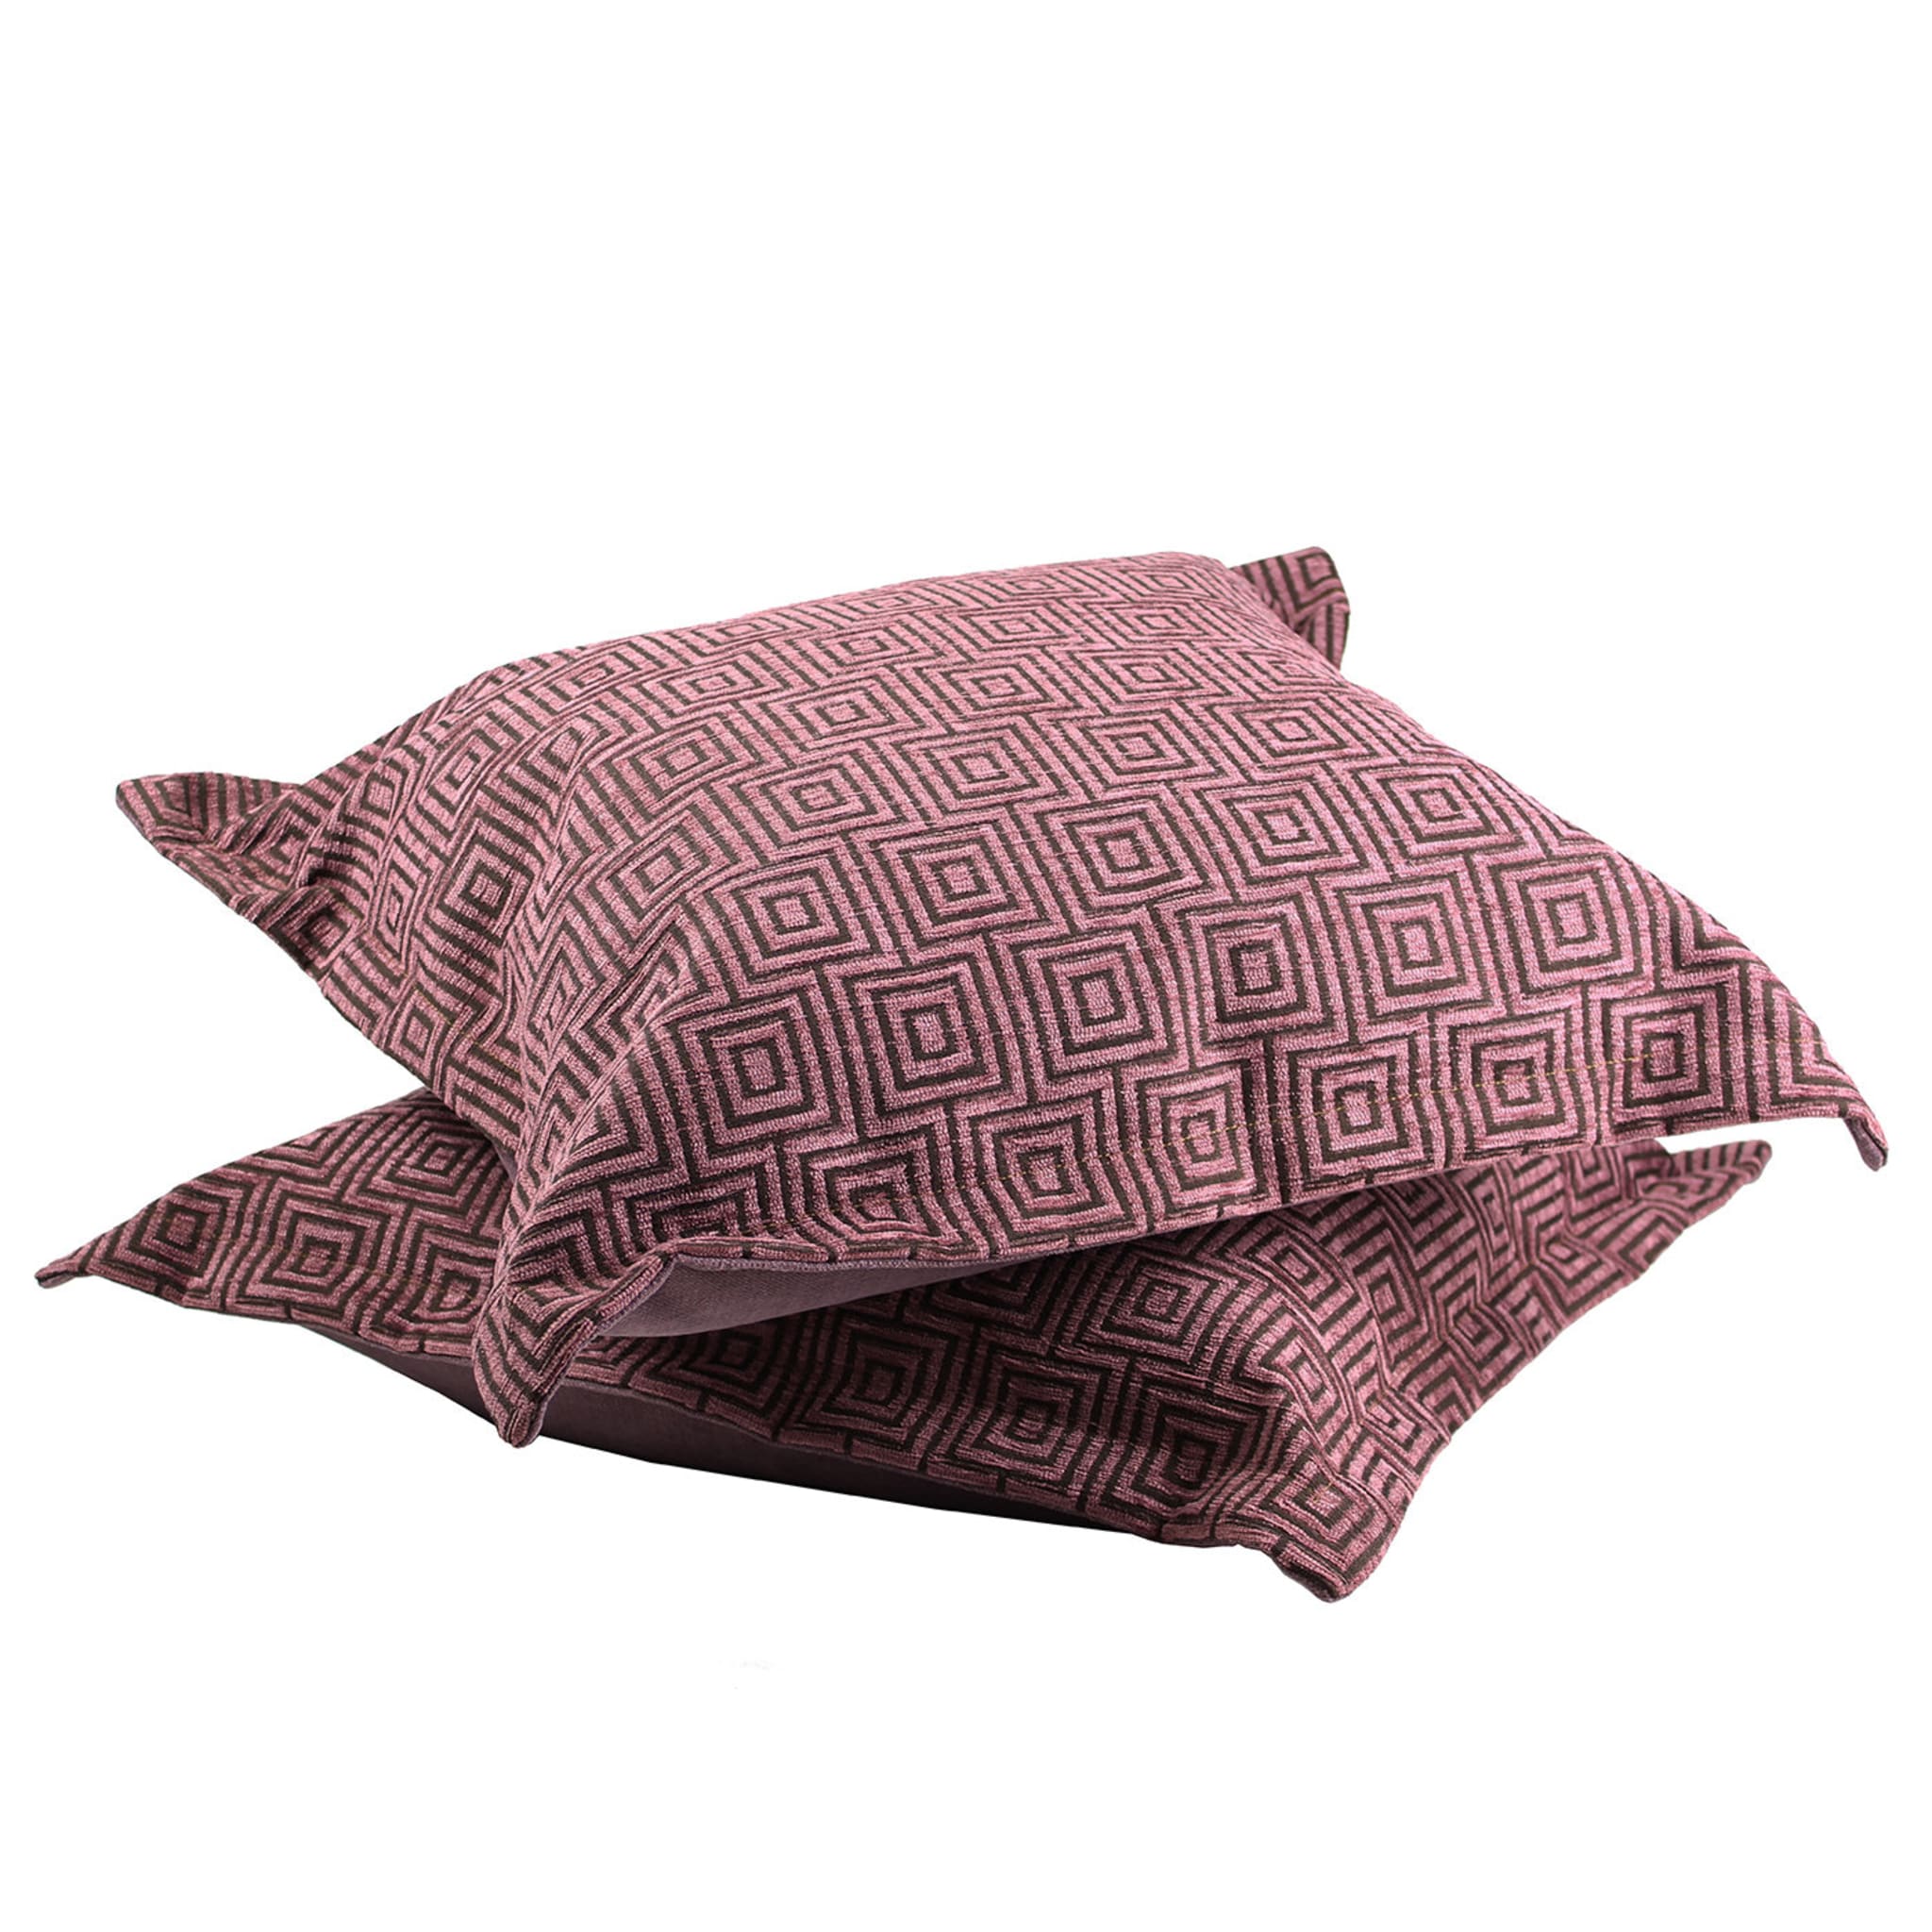 Set of 2 Over-Sized Pink Labyrinth Cushions  - Alternative view 1